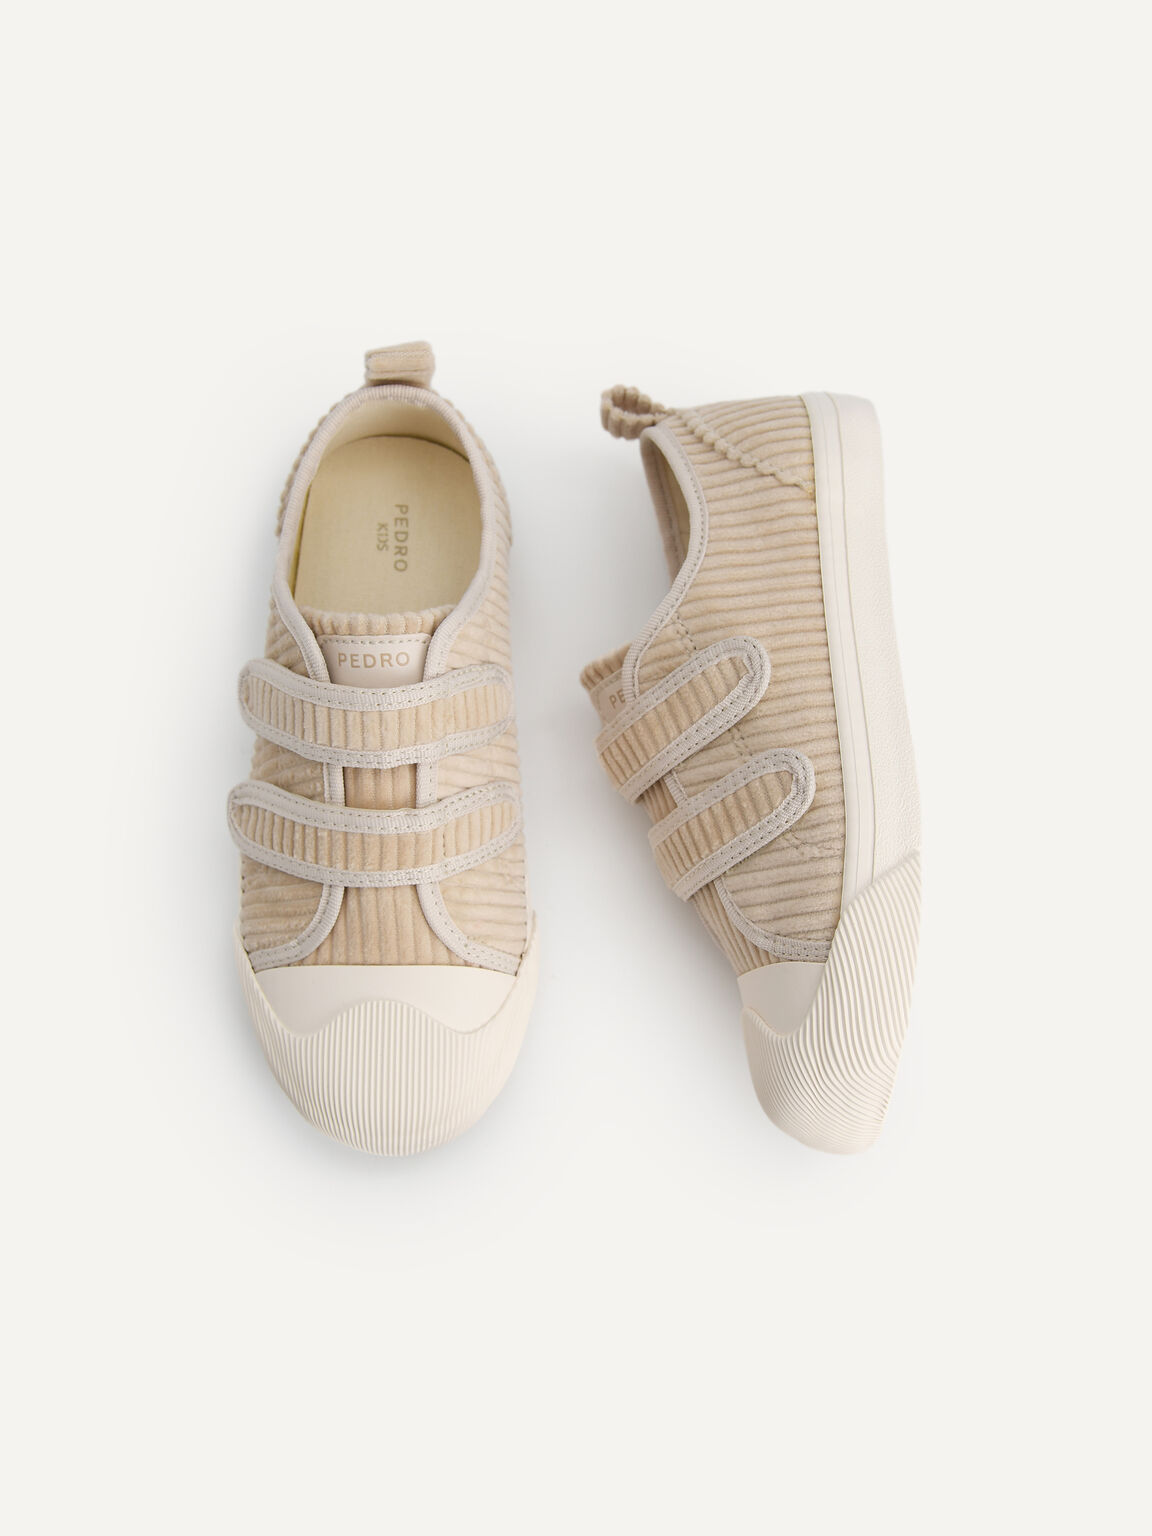 Corduroy Sneakers, Taupe, hi-res